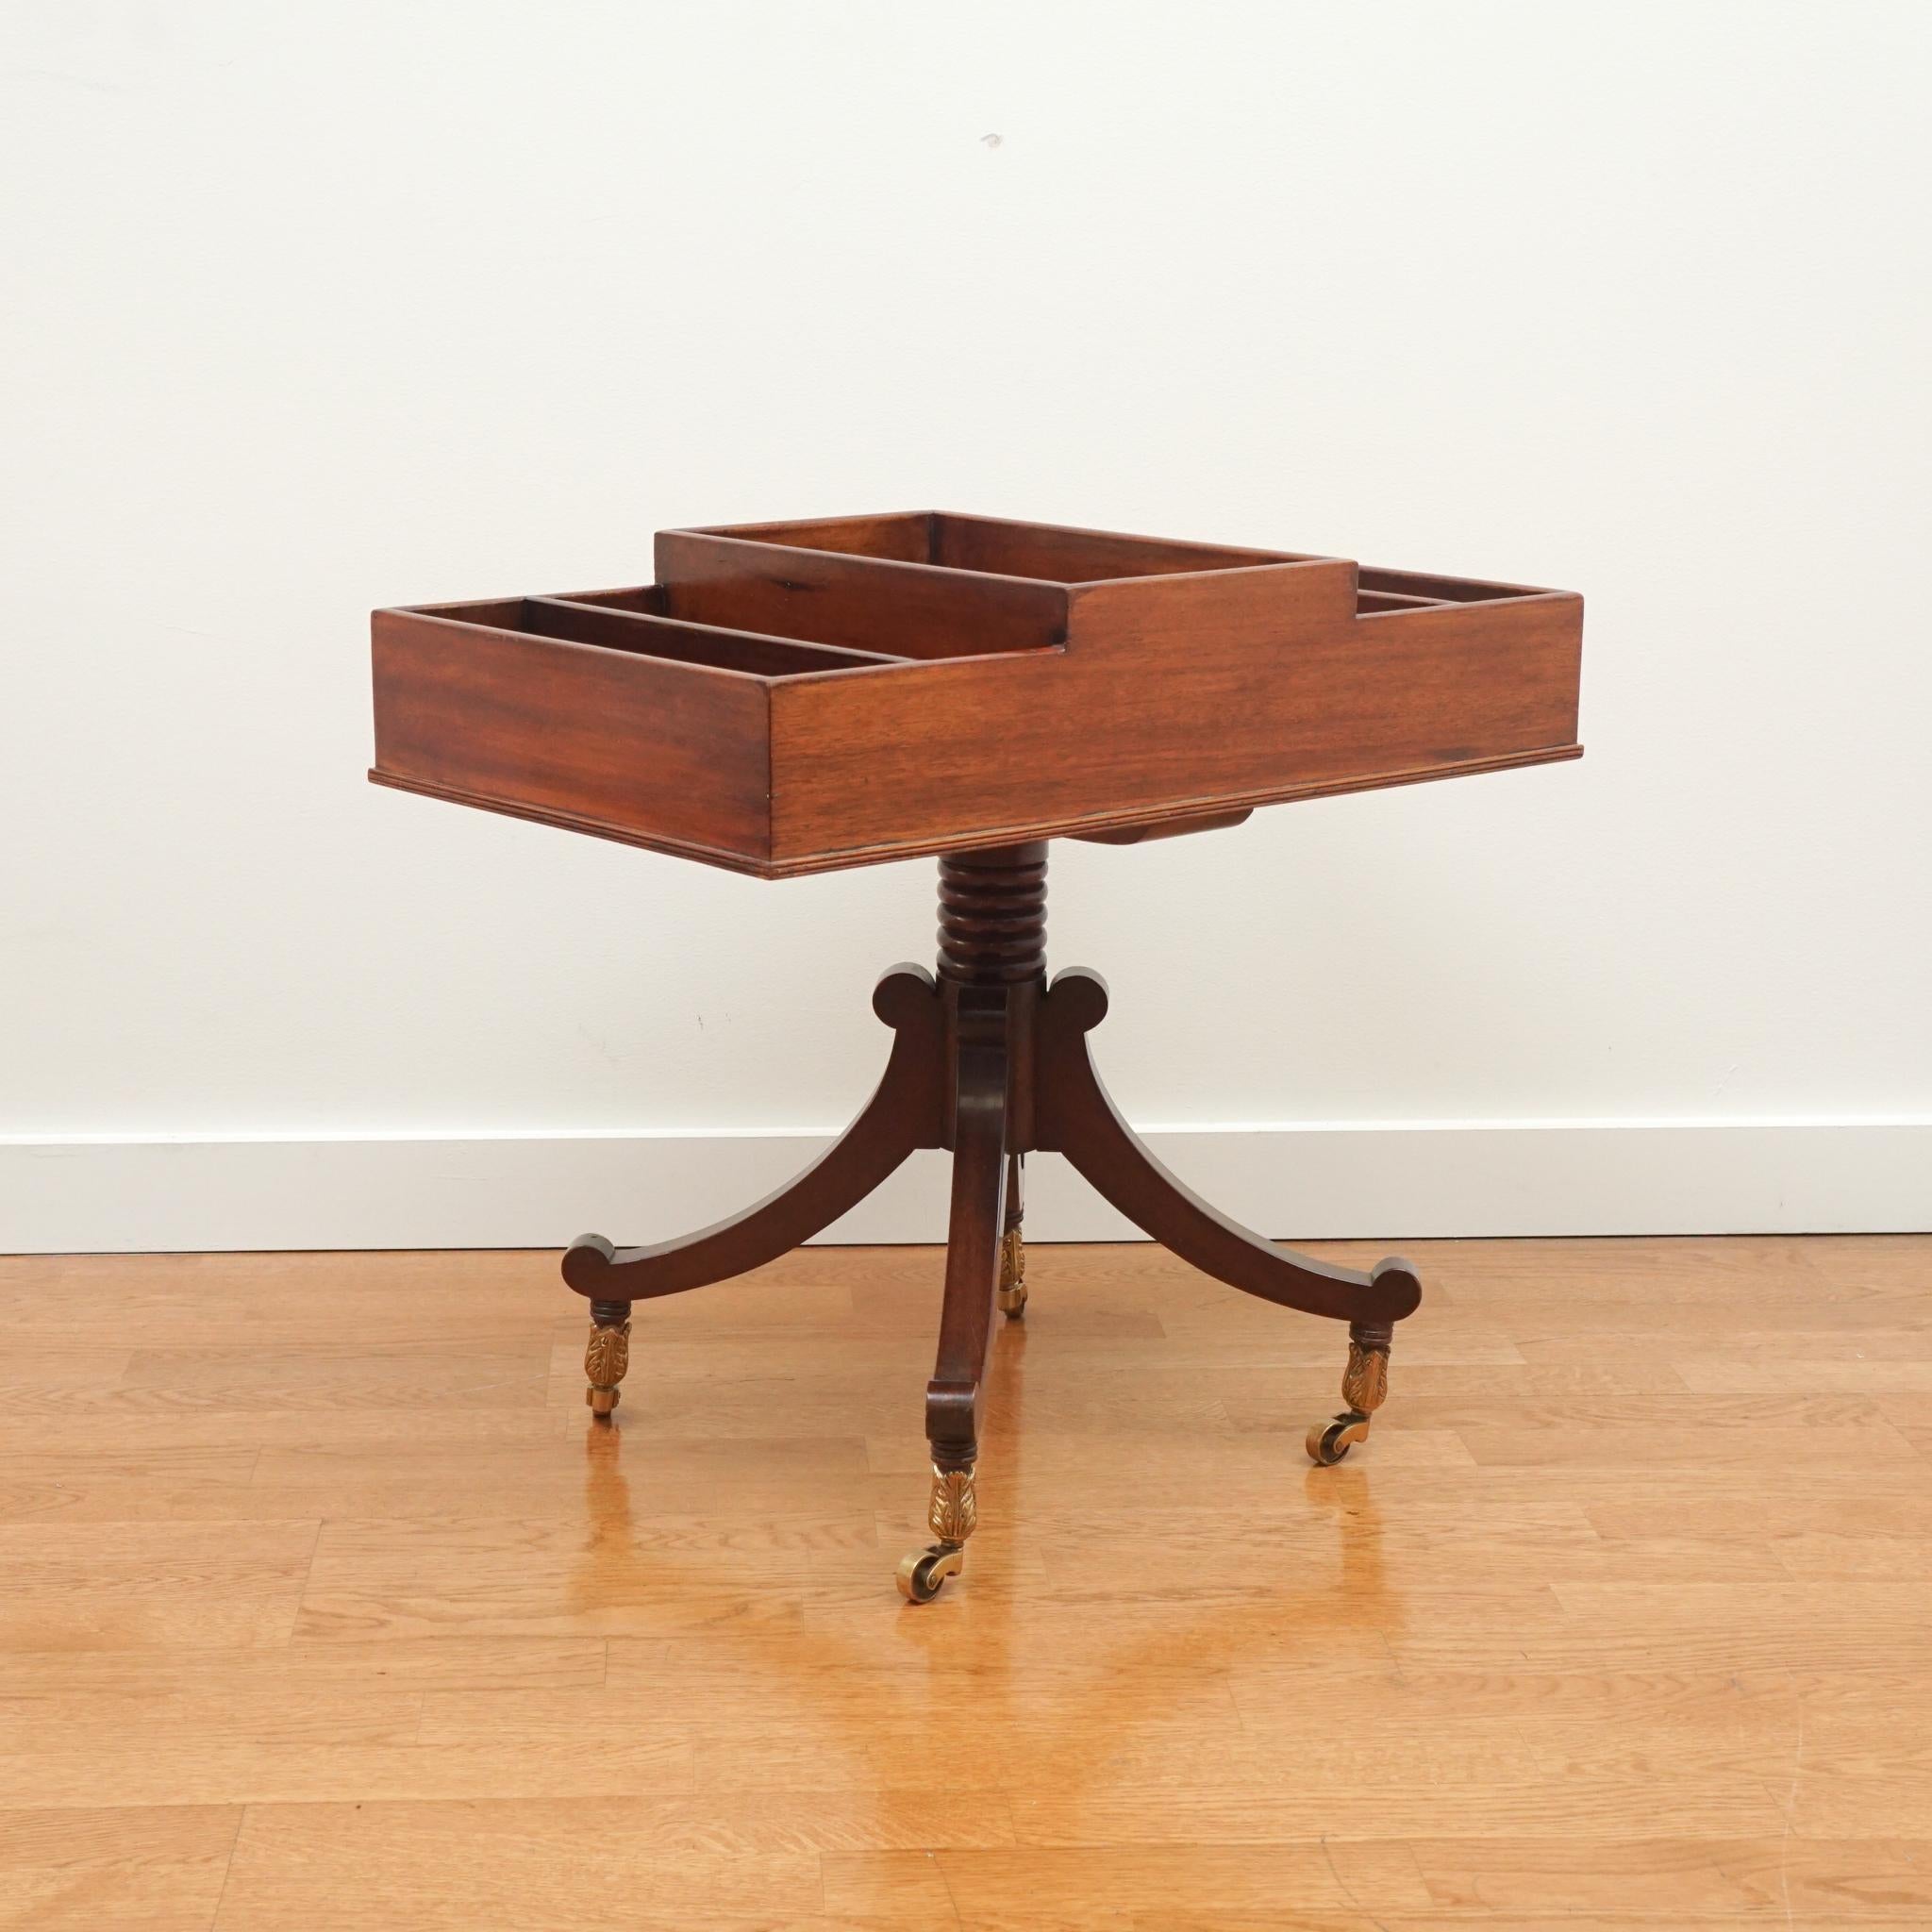 Circa 1960 by The Company Master Craftsman. Although designed for magazines, this exquisitely crafted mahogany table could serve a number functions from holding remotes, keys and collectibles to serving as a mini bar.  Its compact size makes it fit